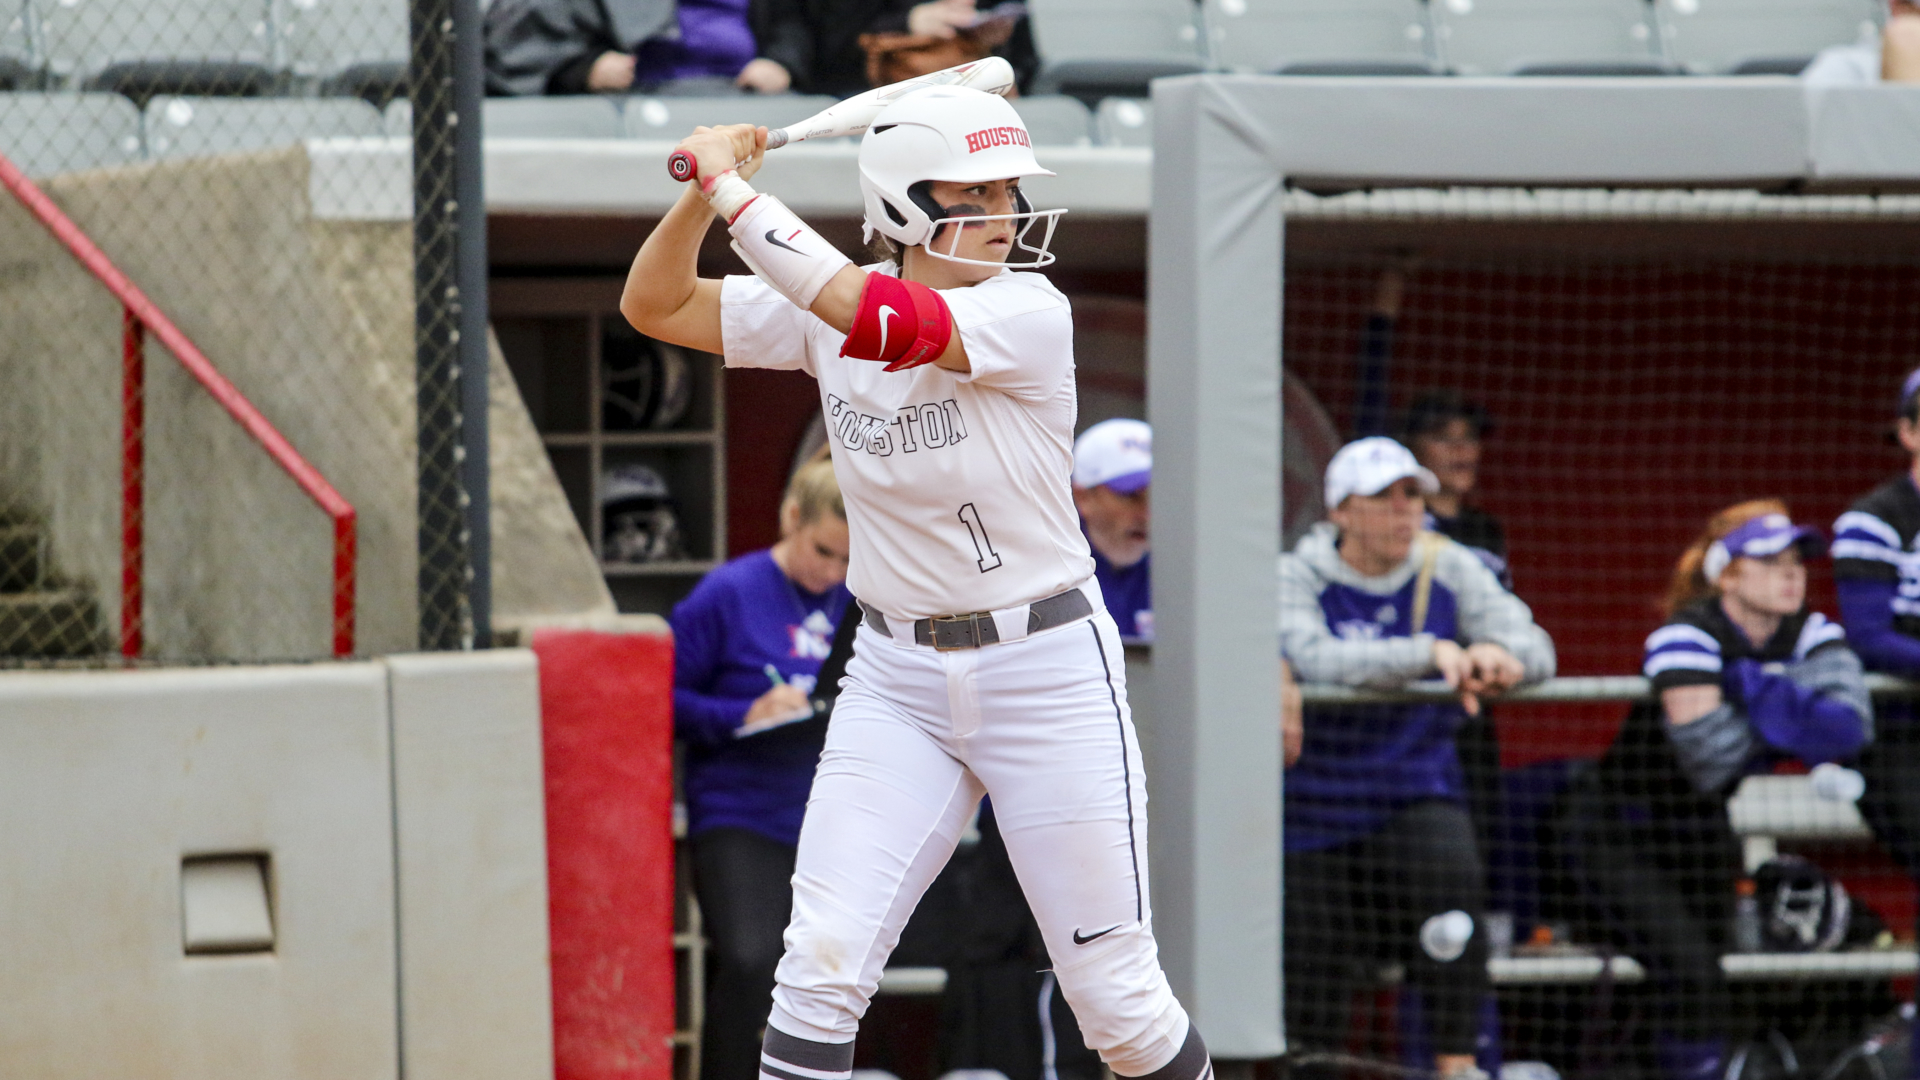 The UH softball team bounced back from its losses to Oklahoma with a big win over Tarleton State on Monday afternoon. | File photo